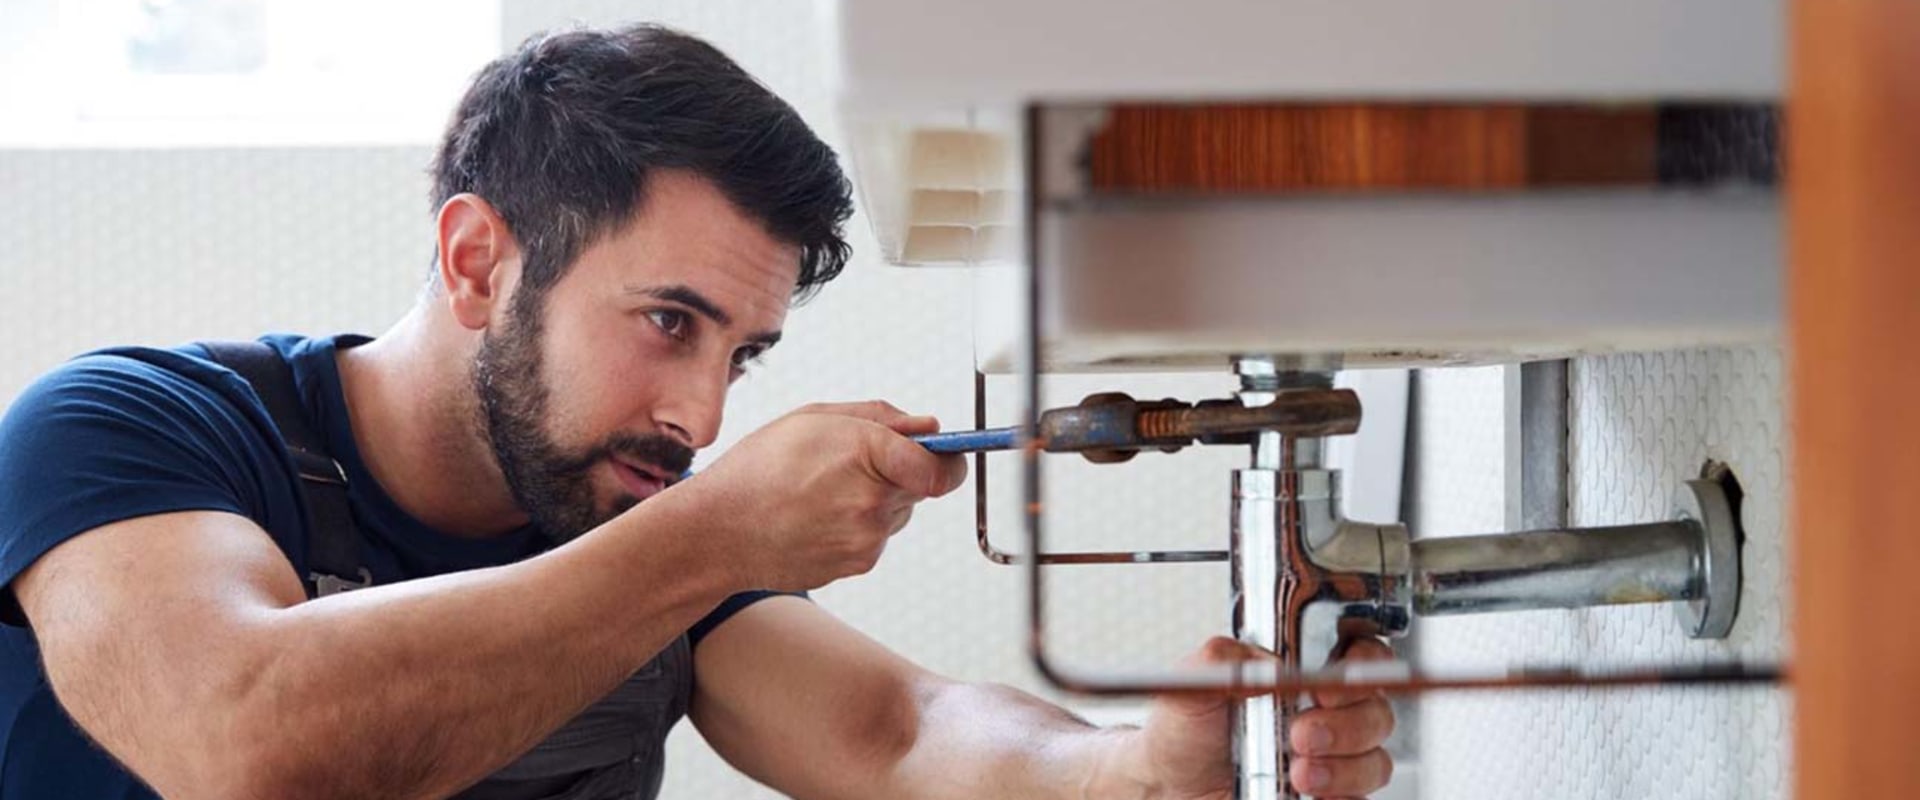 Checking References and Reviews for Affordable Plumbers